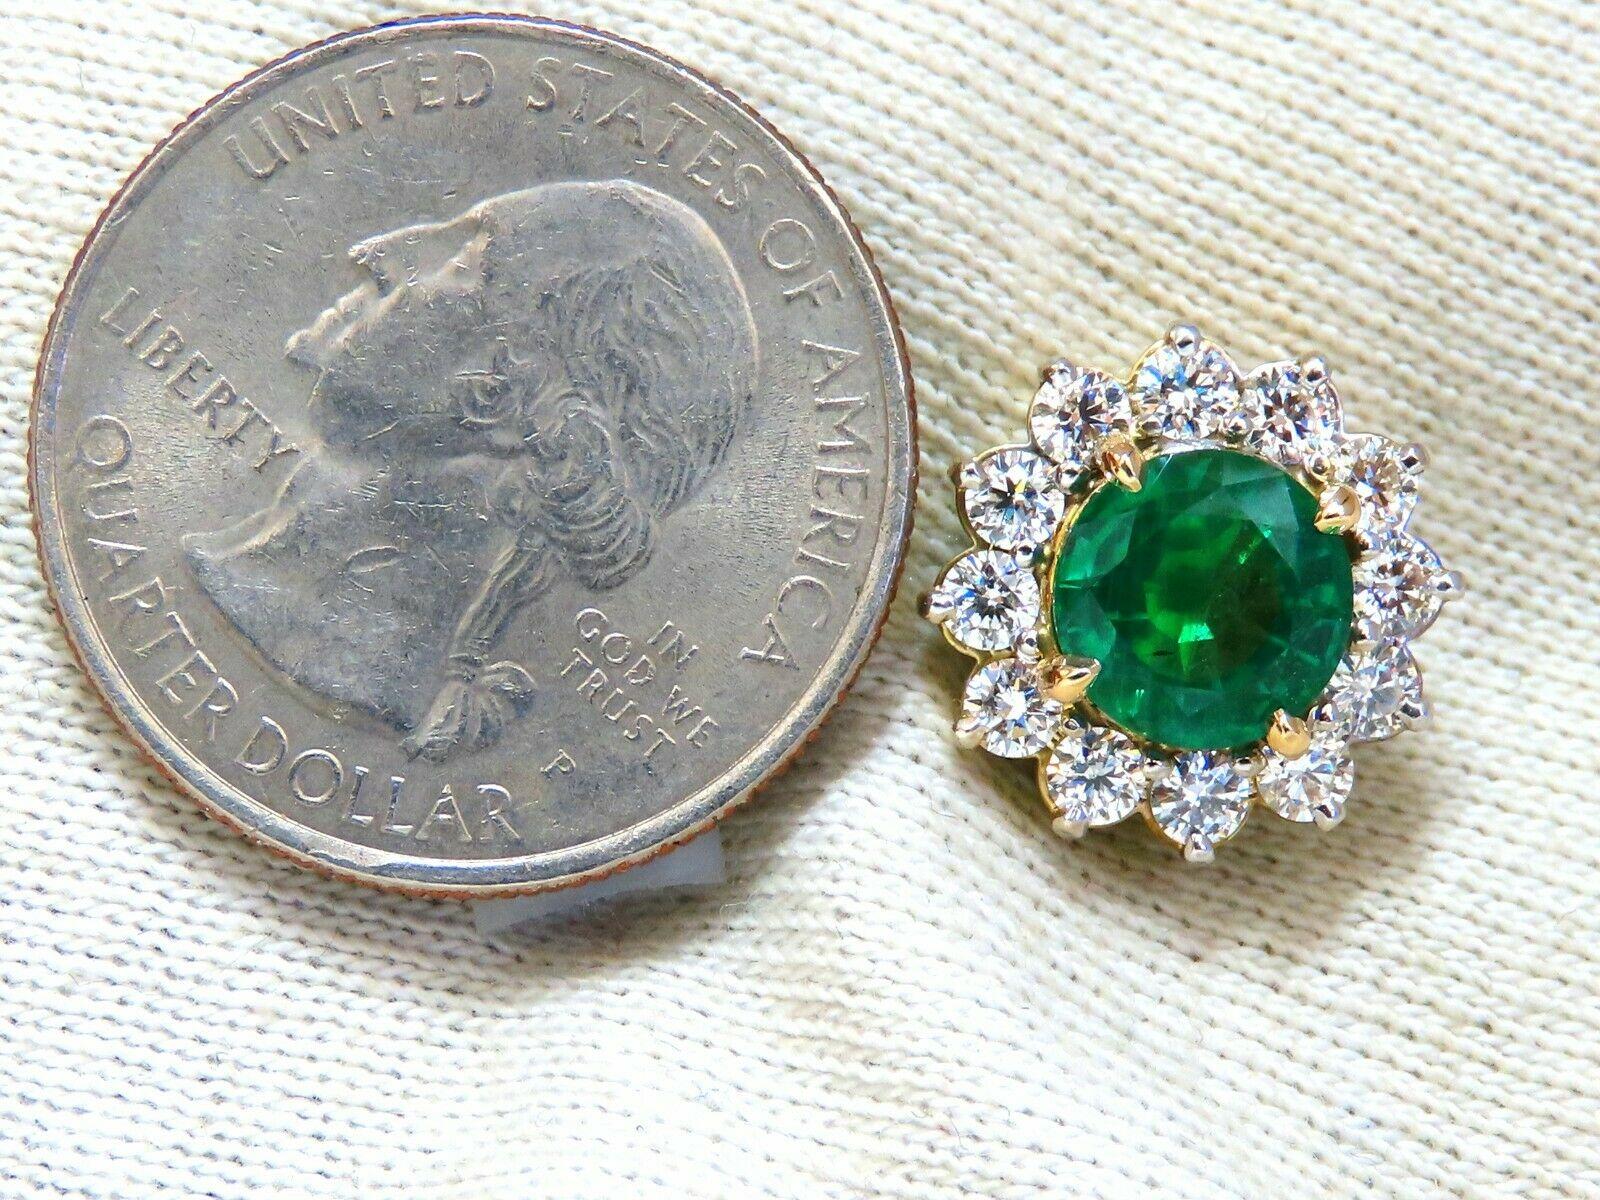 Halo Prime Classic Clusters.

2.19 & 2.59ct. Natural (2) Emeralds

GIA Certified #2185151834

Emeralds: Round brilliant cuts.

Transparent & Even Green tone, Rated F1 & F2

Ranging: 8.12-8.18 x 5.25 & 8.17-8.24 x 5.90mm



1.80cts of round diamonds: